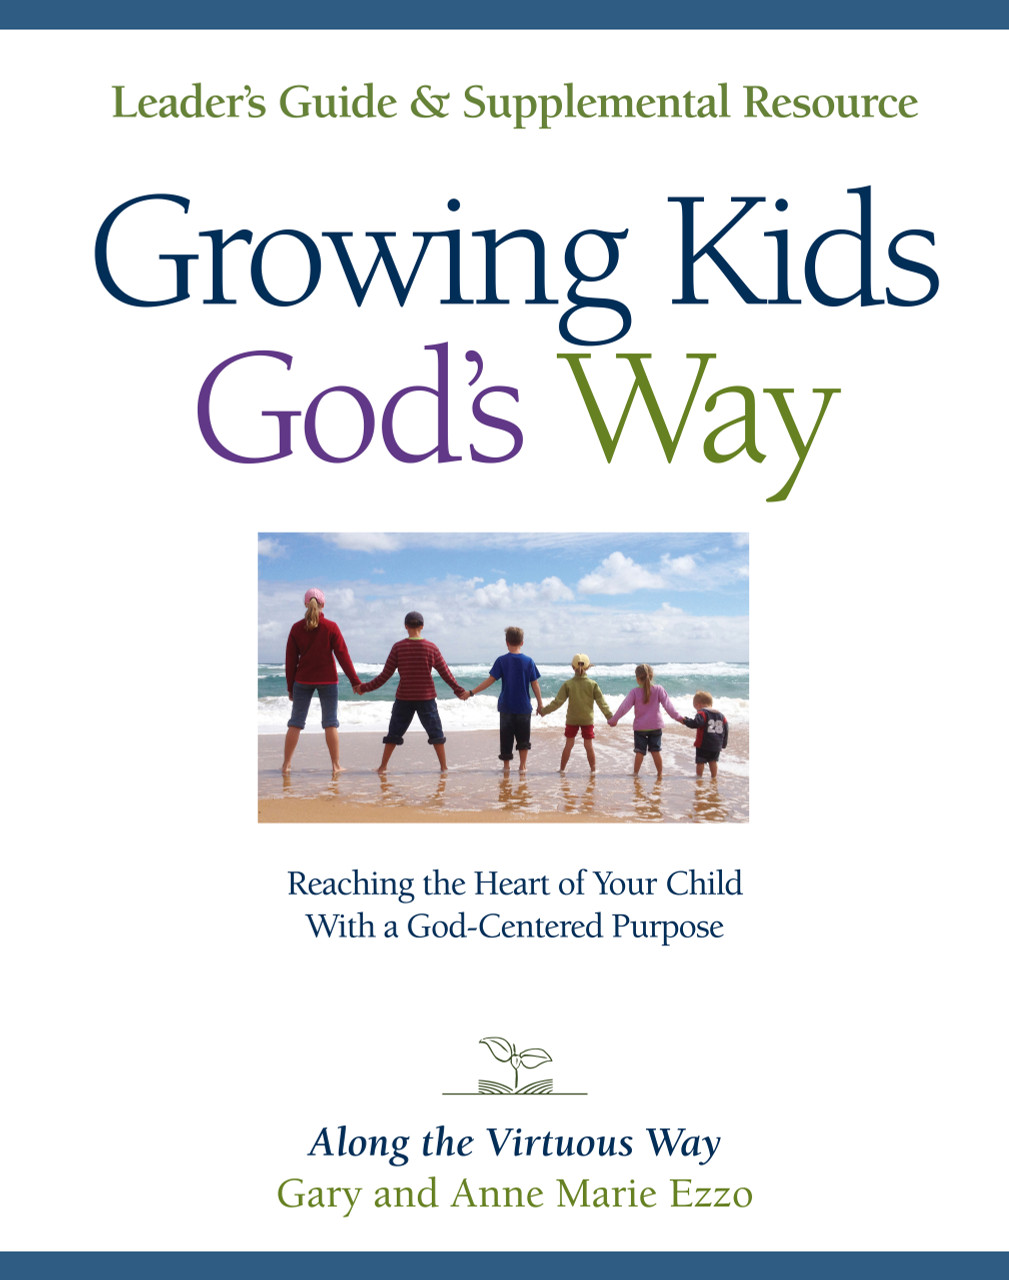 08-LEADER'S GUIDE | Growing Kids God's Way - (Print Edition)